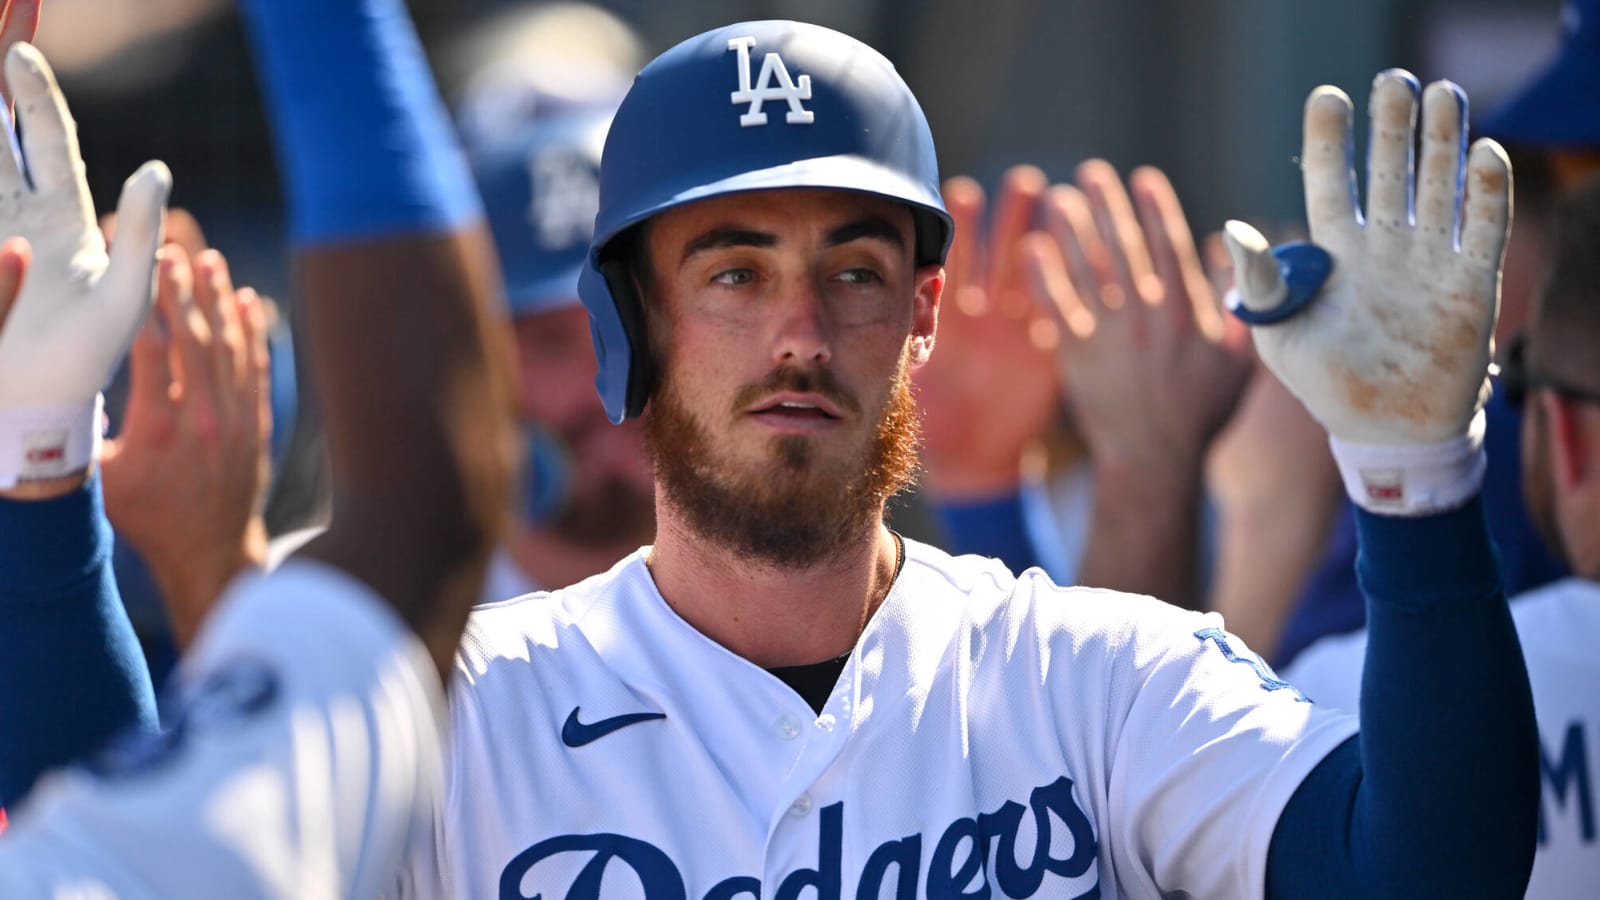 Dodgers News: Cody Bellinger Finding Groove With Swing